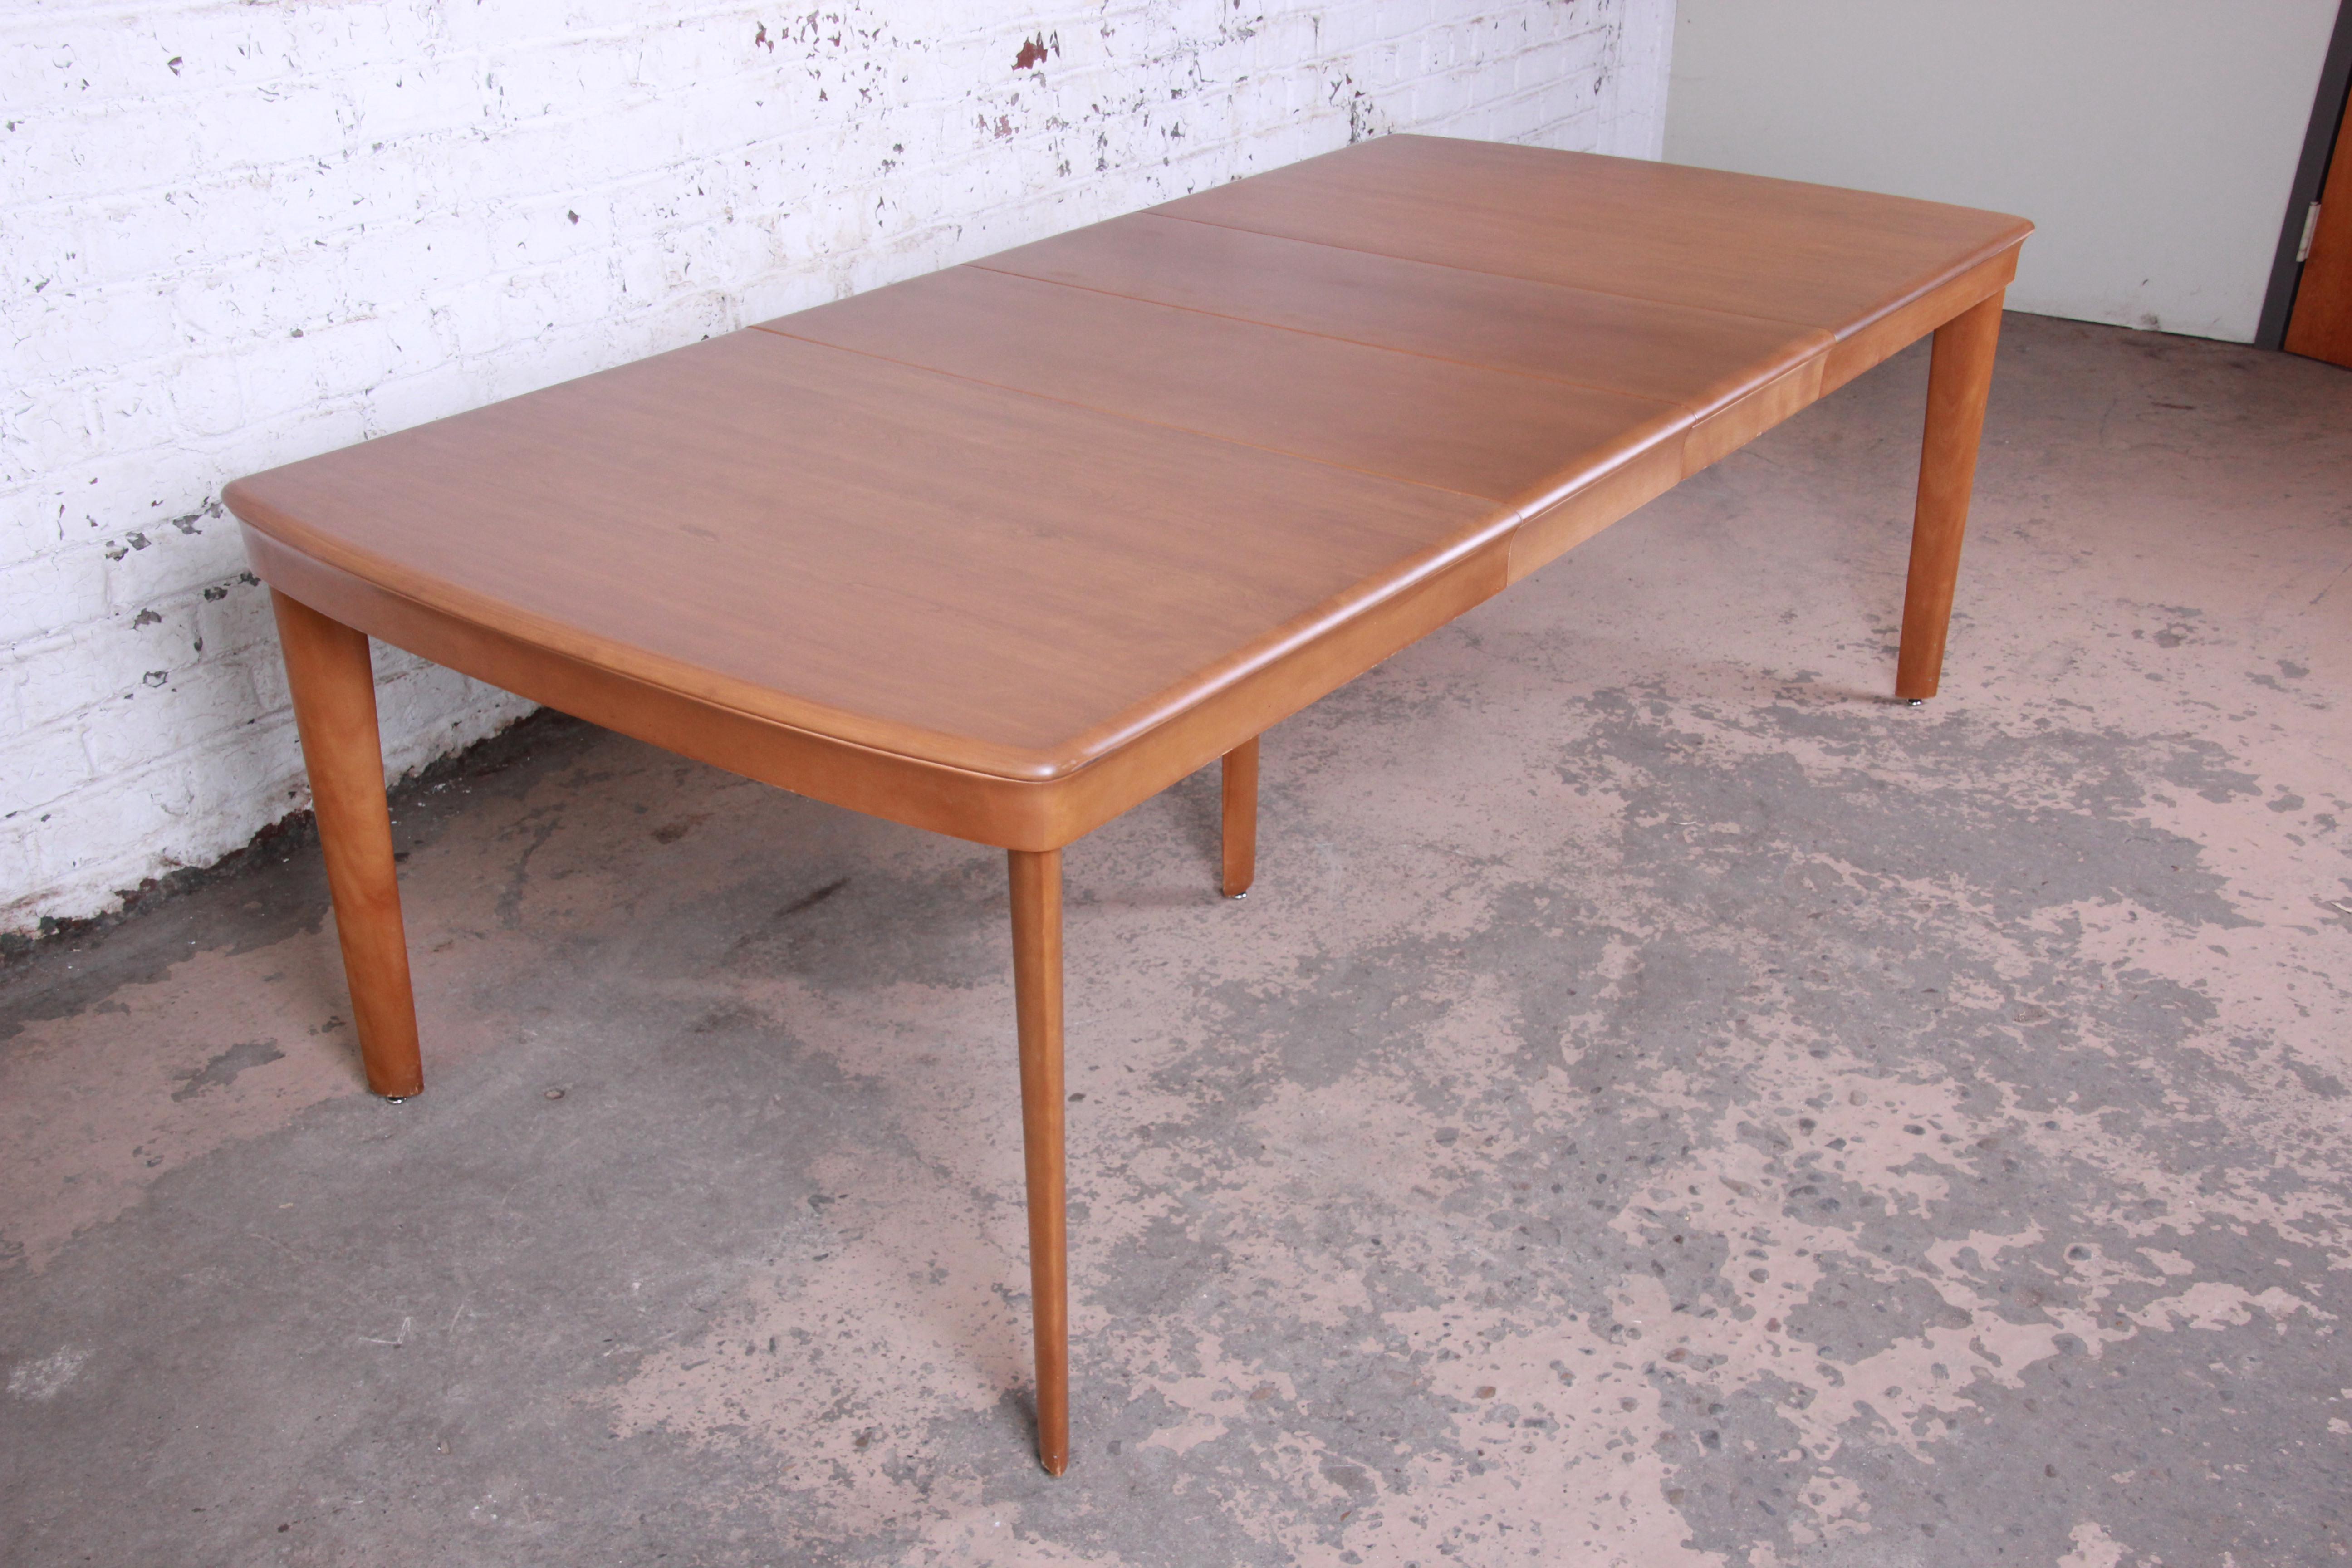 Offering a very nice Heywood Wakefield Mid-Century Modern extension dining table. The table has nice clean modern lines and expands to 90.5